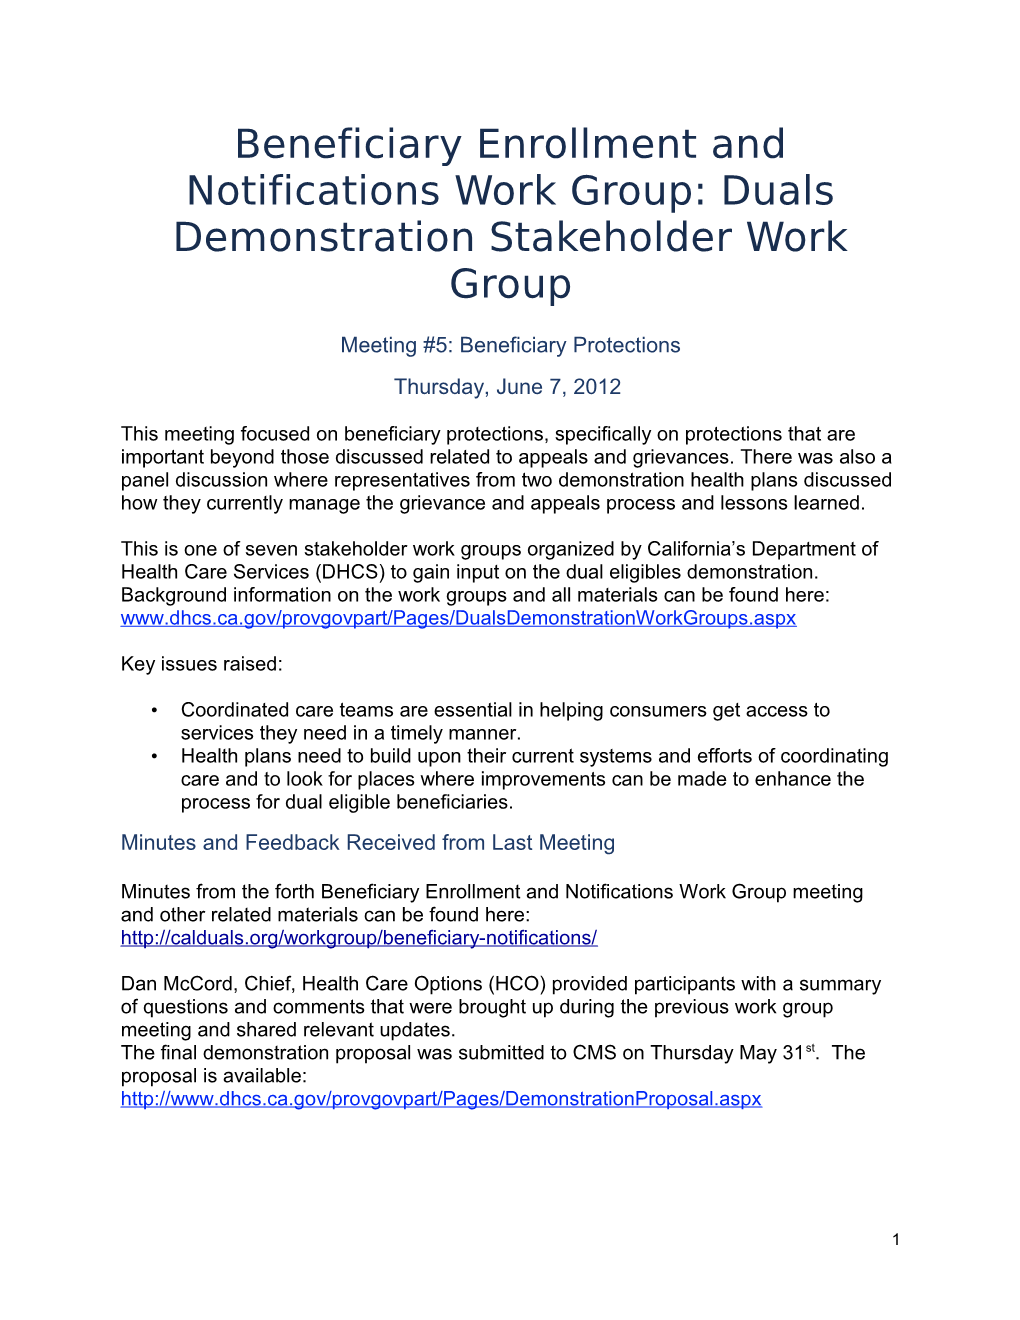 Beneficiary Enrollment and Notifications Work Group: Duals Demonstration Stakeholder Work Group